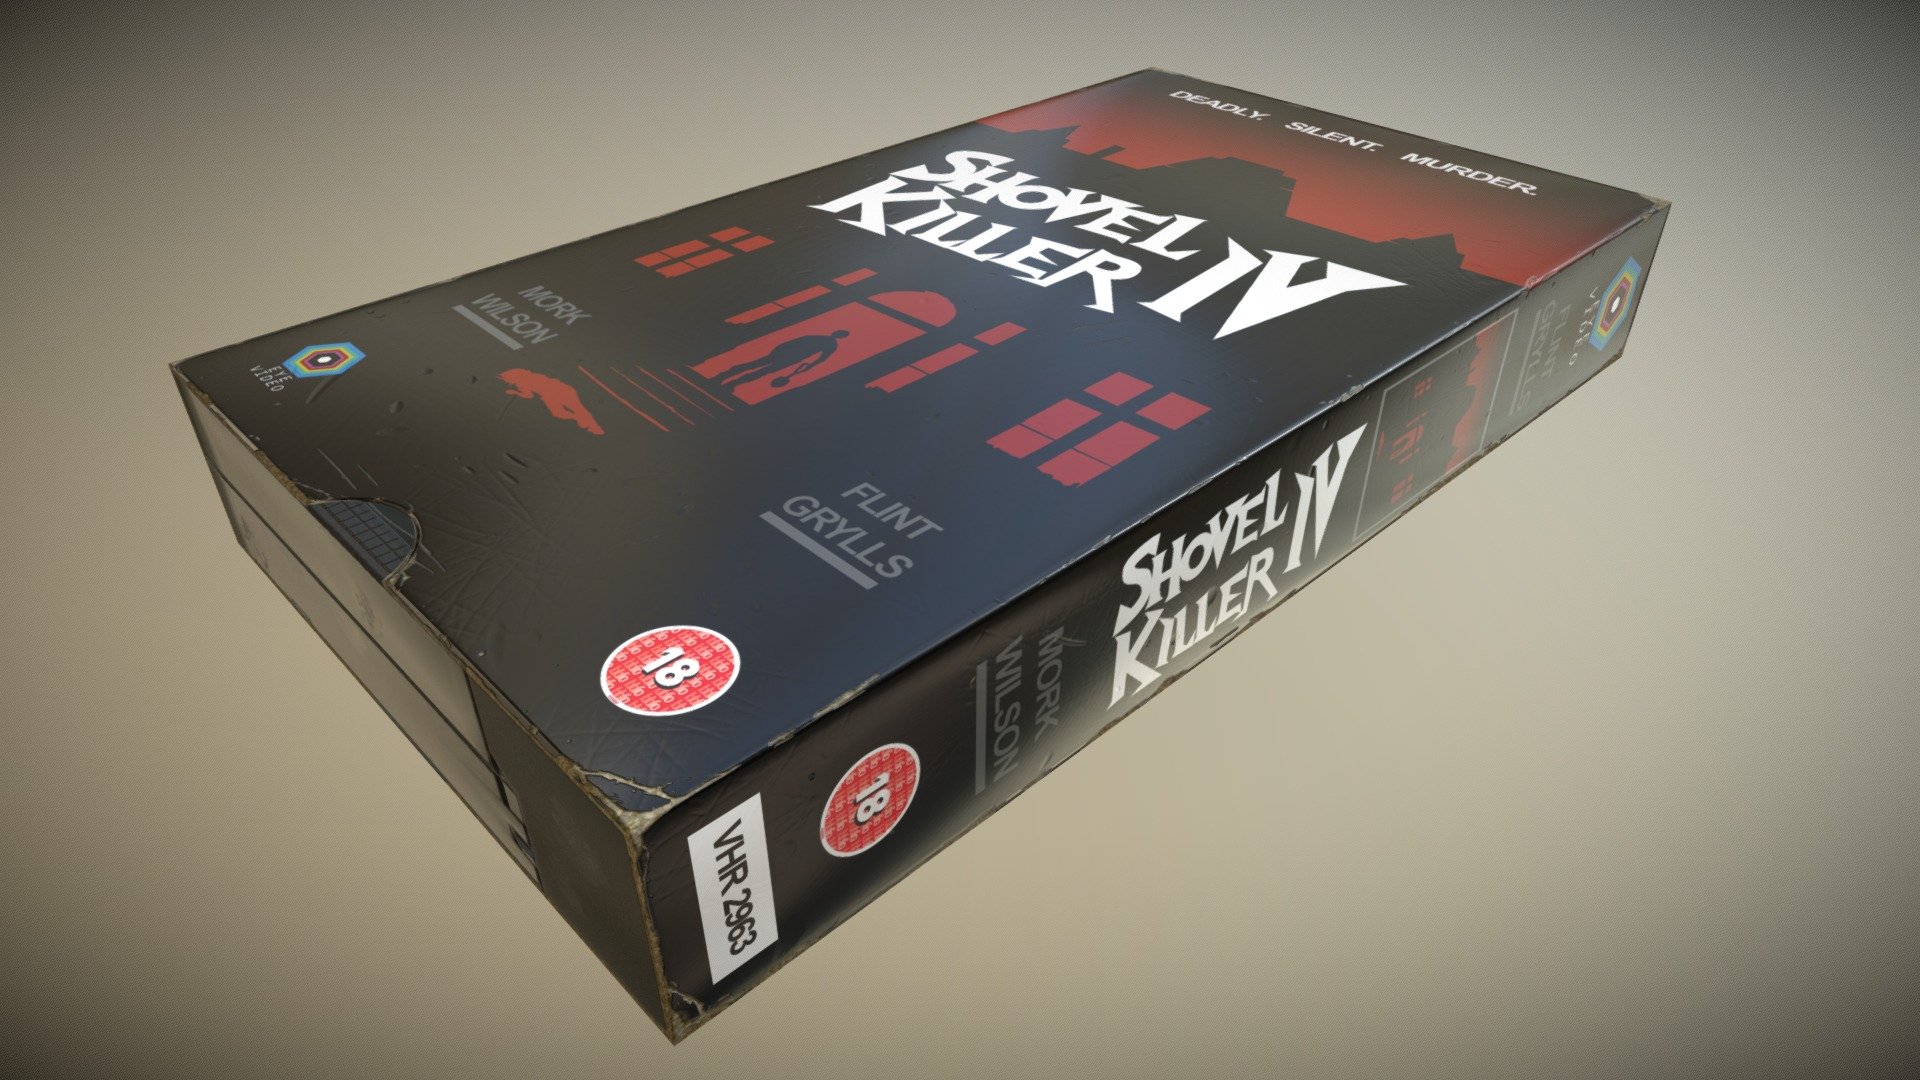 VHS box for a horror short created during the Global Game Jam 2017.

Link to short film:

https://www.youtube.com/watch?v=Mx3dXncgRUI

On purchase: Feel free to email me if you would lik the PSD files 3d model